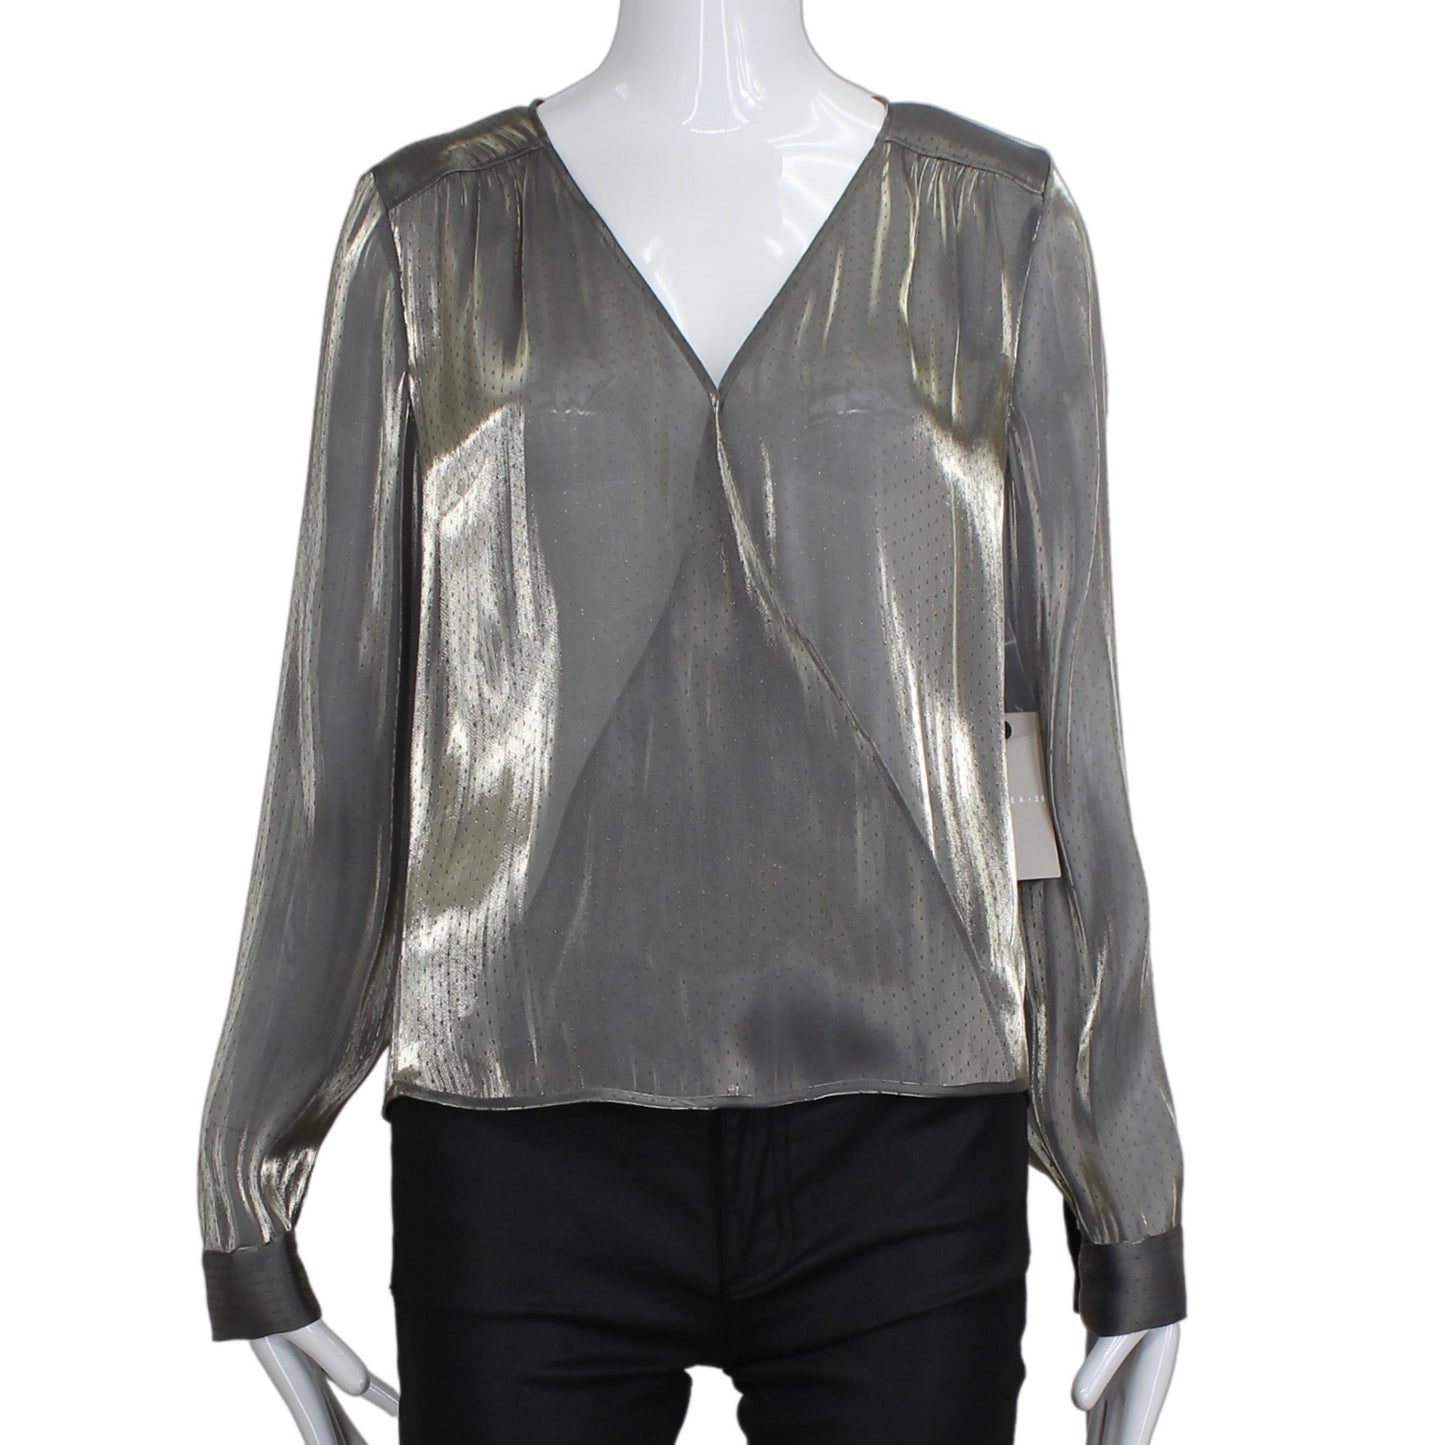 CHELSEA 28 GREY/GOLD SHEER BLOUSE SZ MD